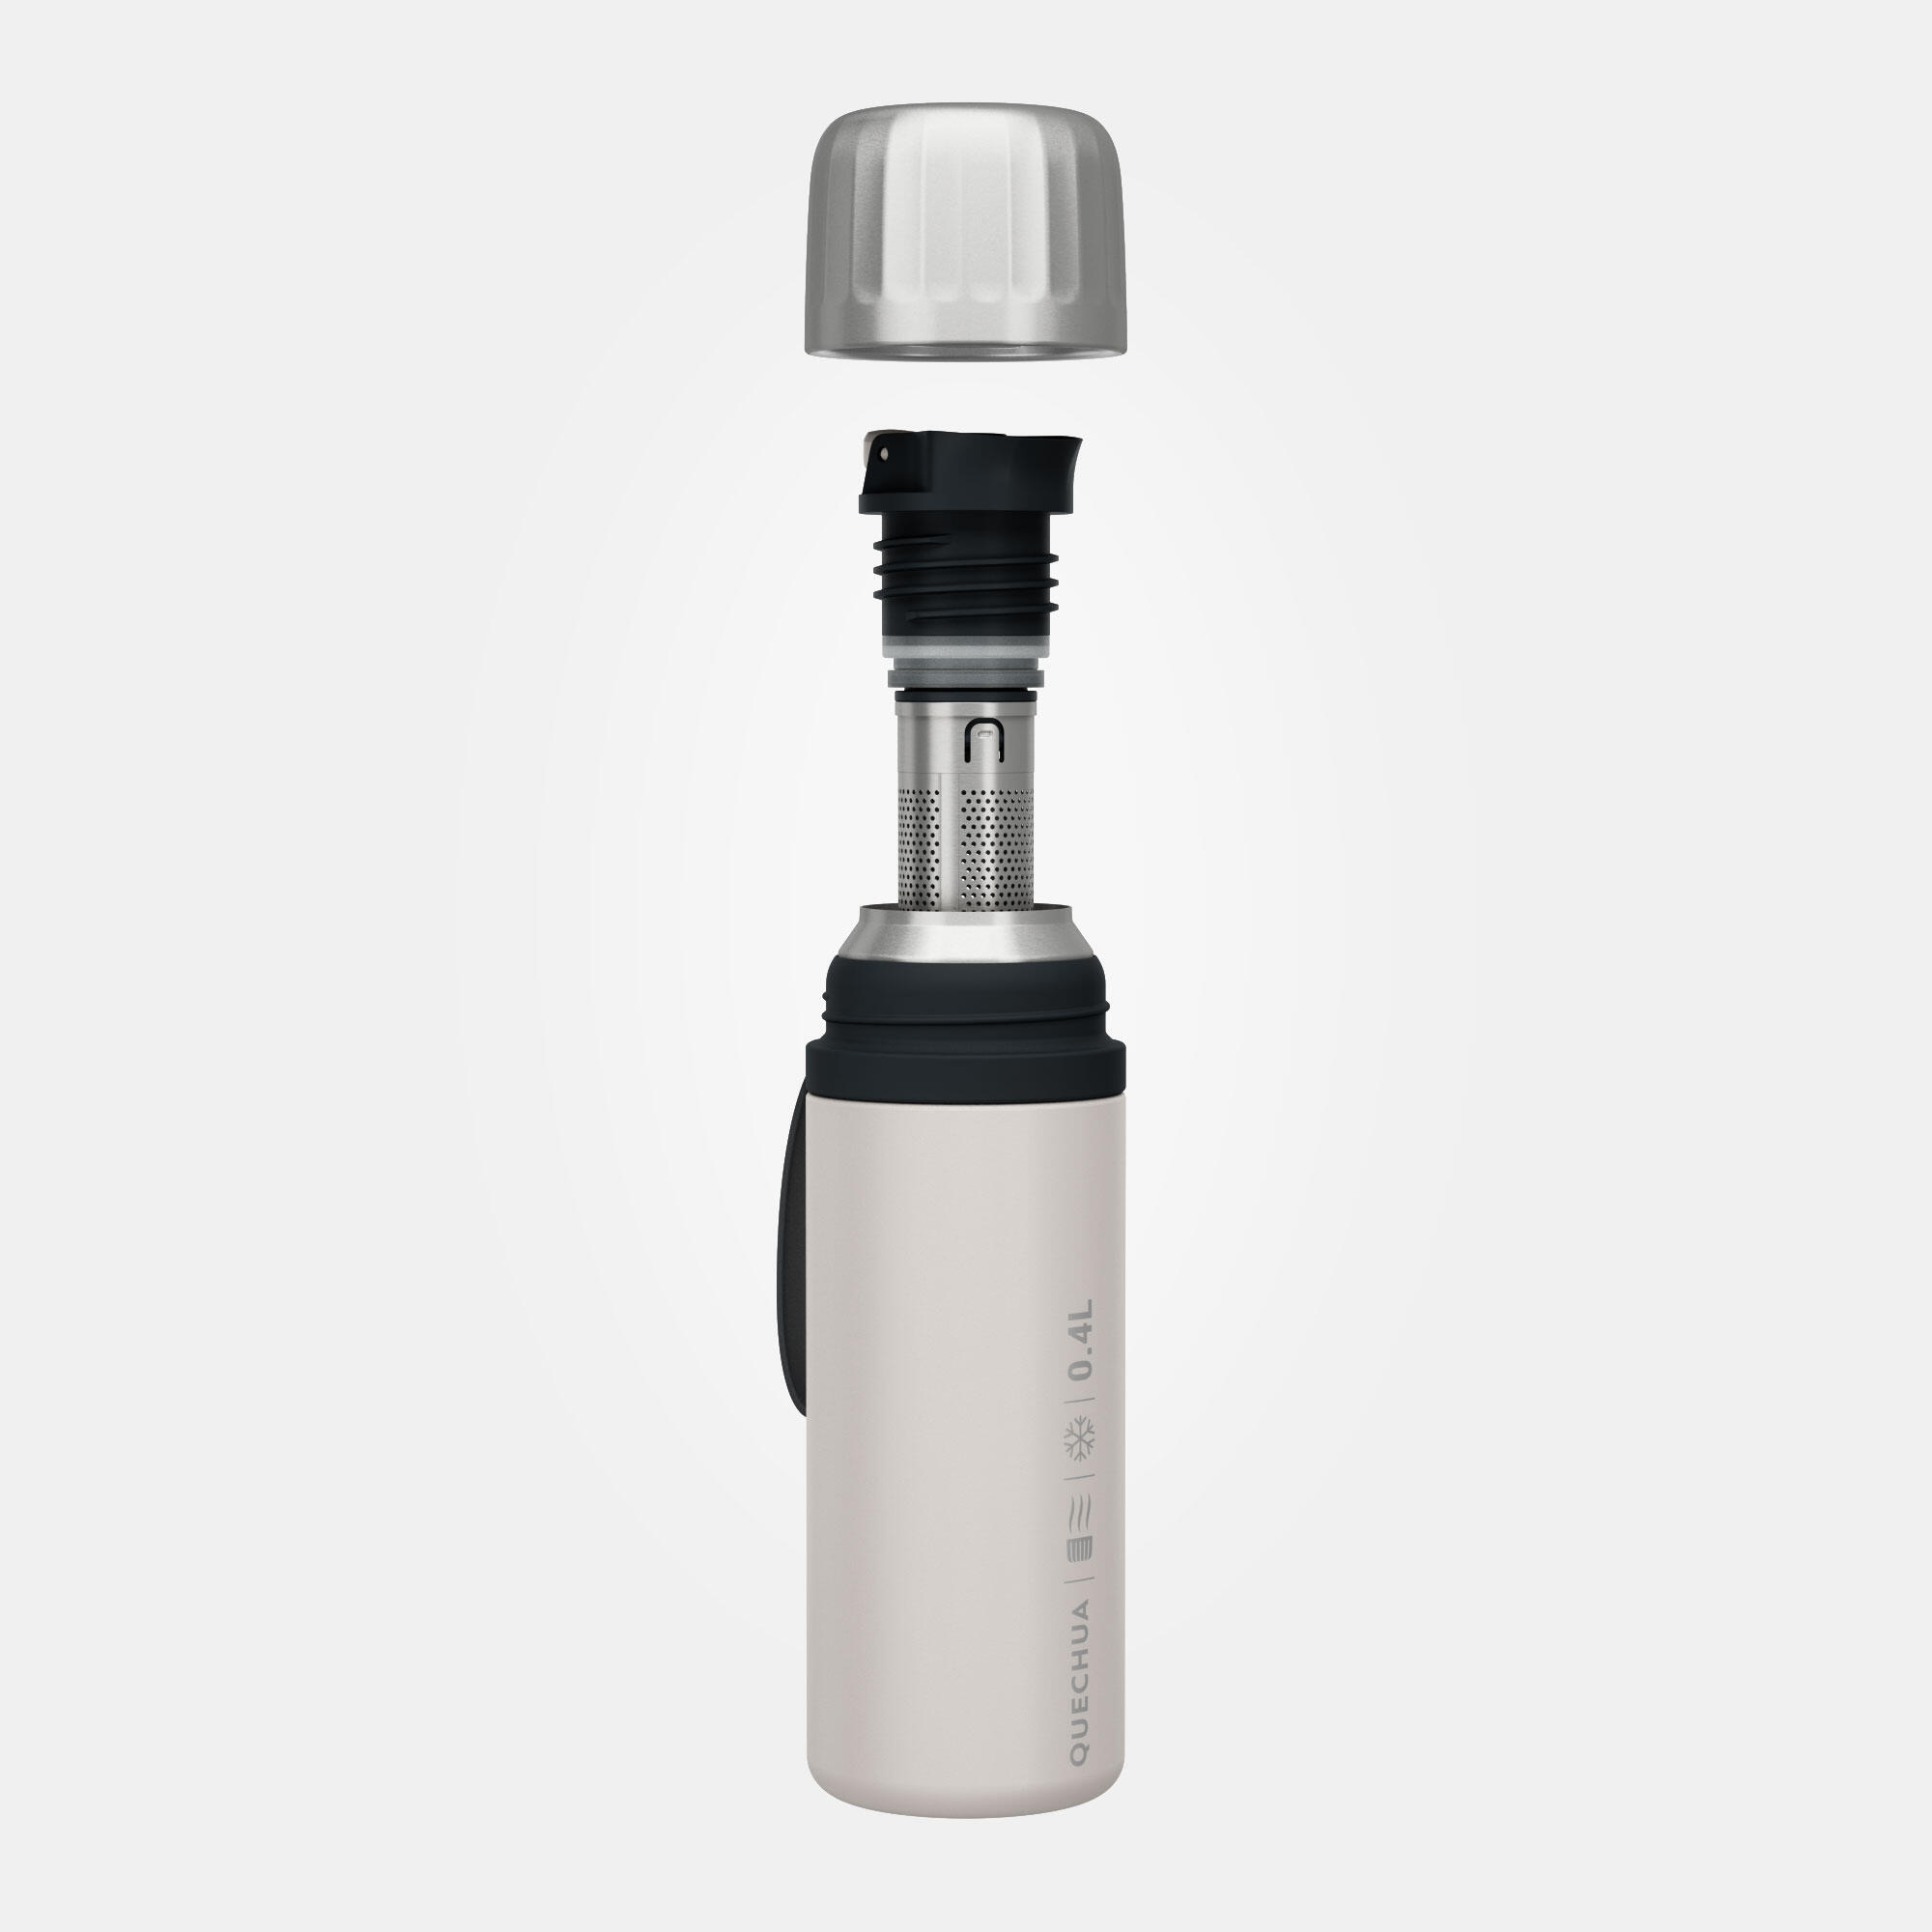 MH900 stainless steel insulated hiking bottle with quick-release cap - 0.4L 3/12